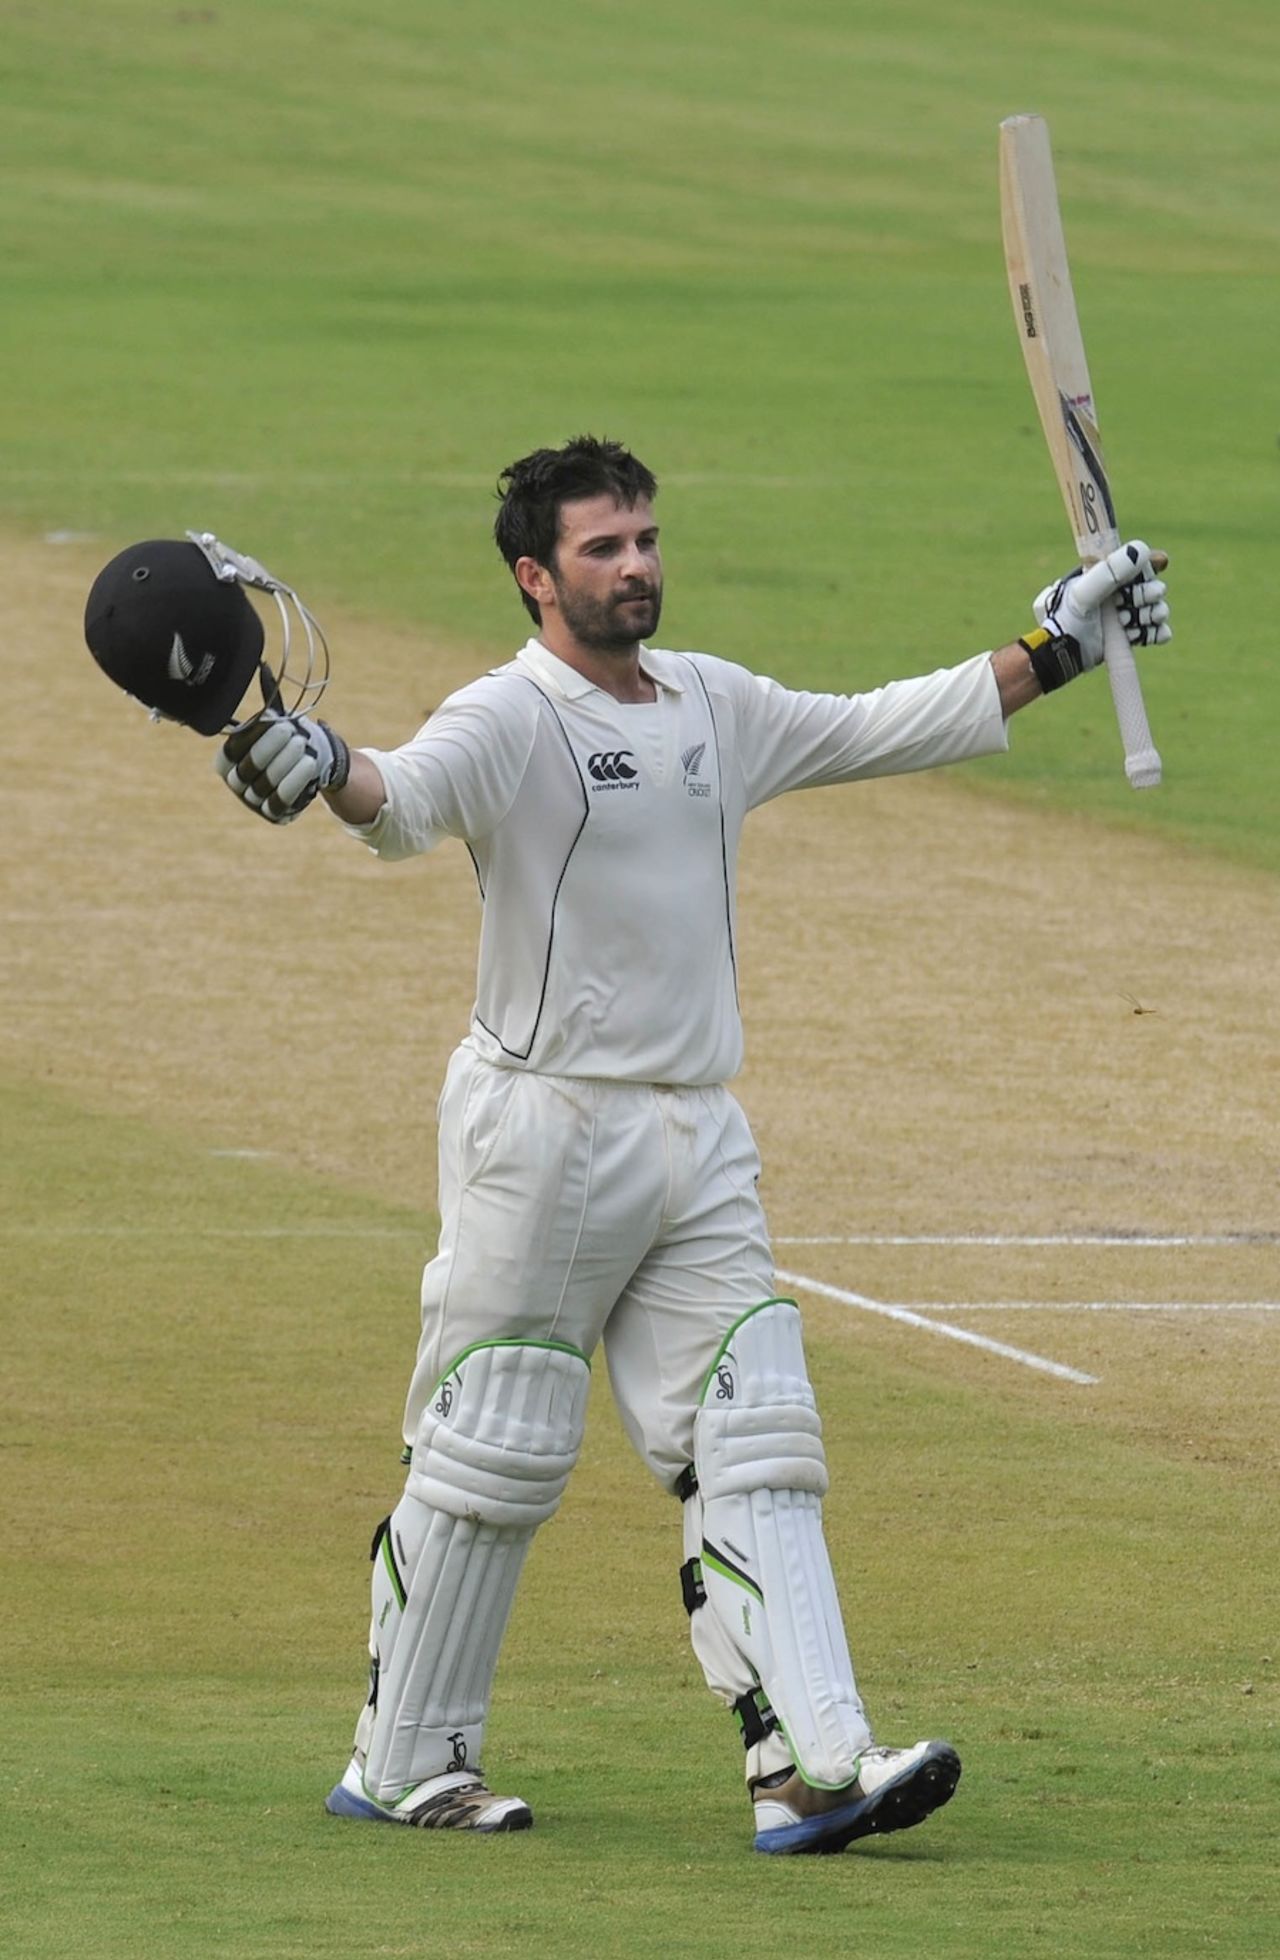 Anton Devcich scored his maiden first-class hundred, India A v New Zealand A, 2nd unofficial Test, Visakhapatnam, Sep 2, 2013